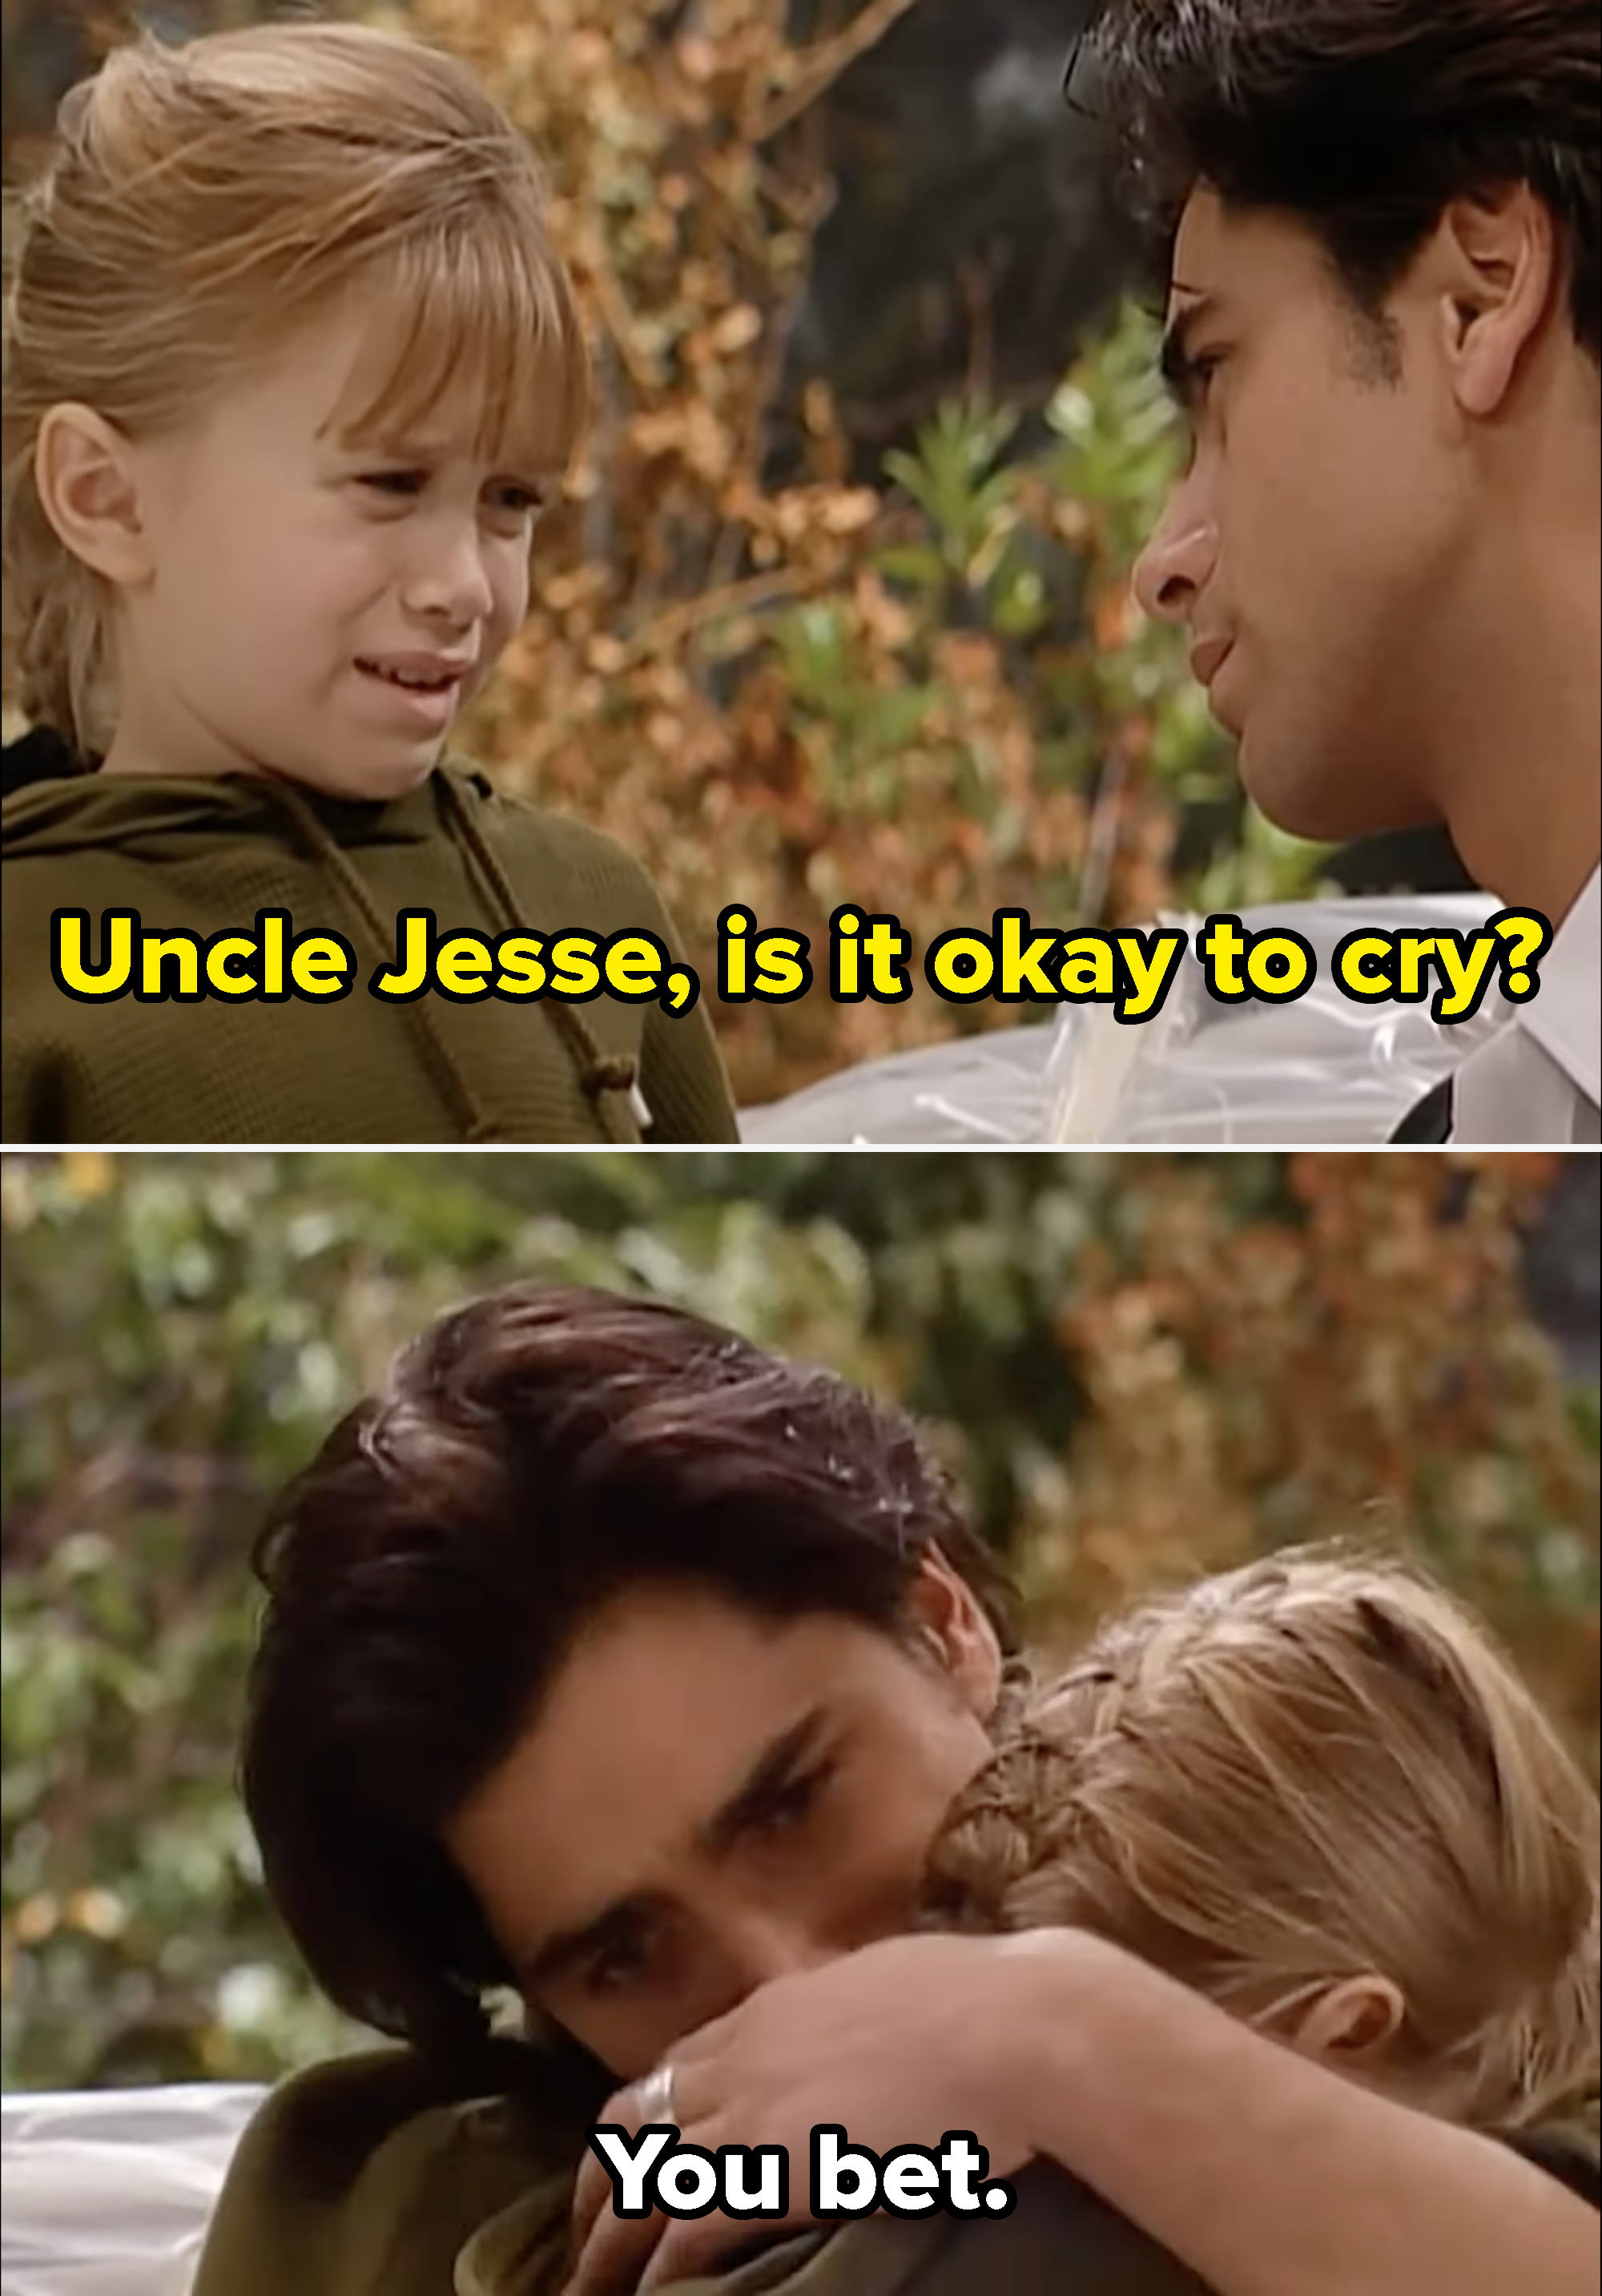 Michelle asking Uncle Jesse if it&#x27;s okay to cry